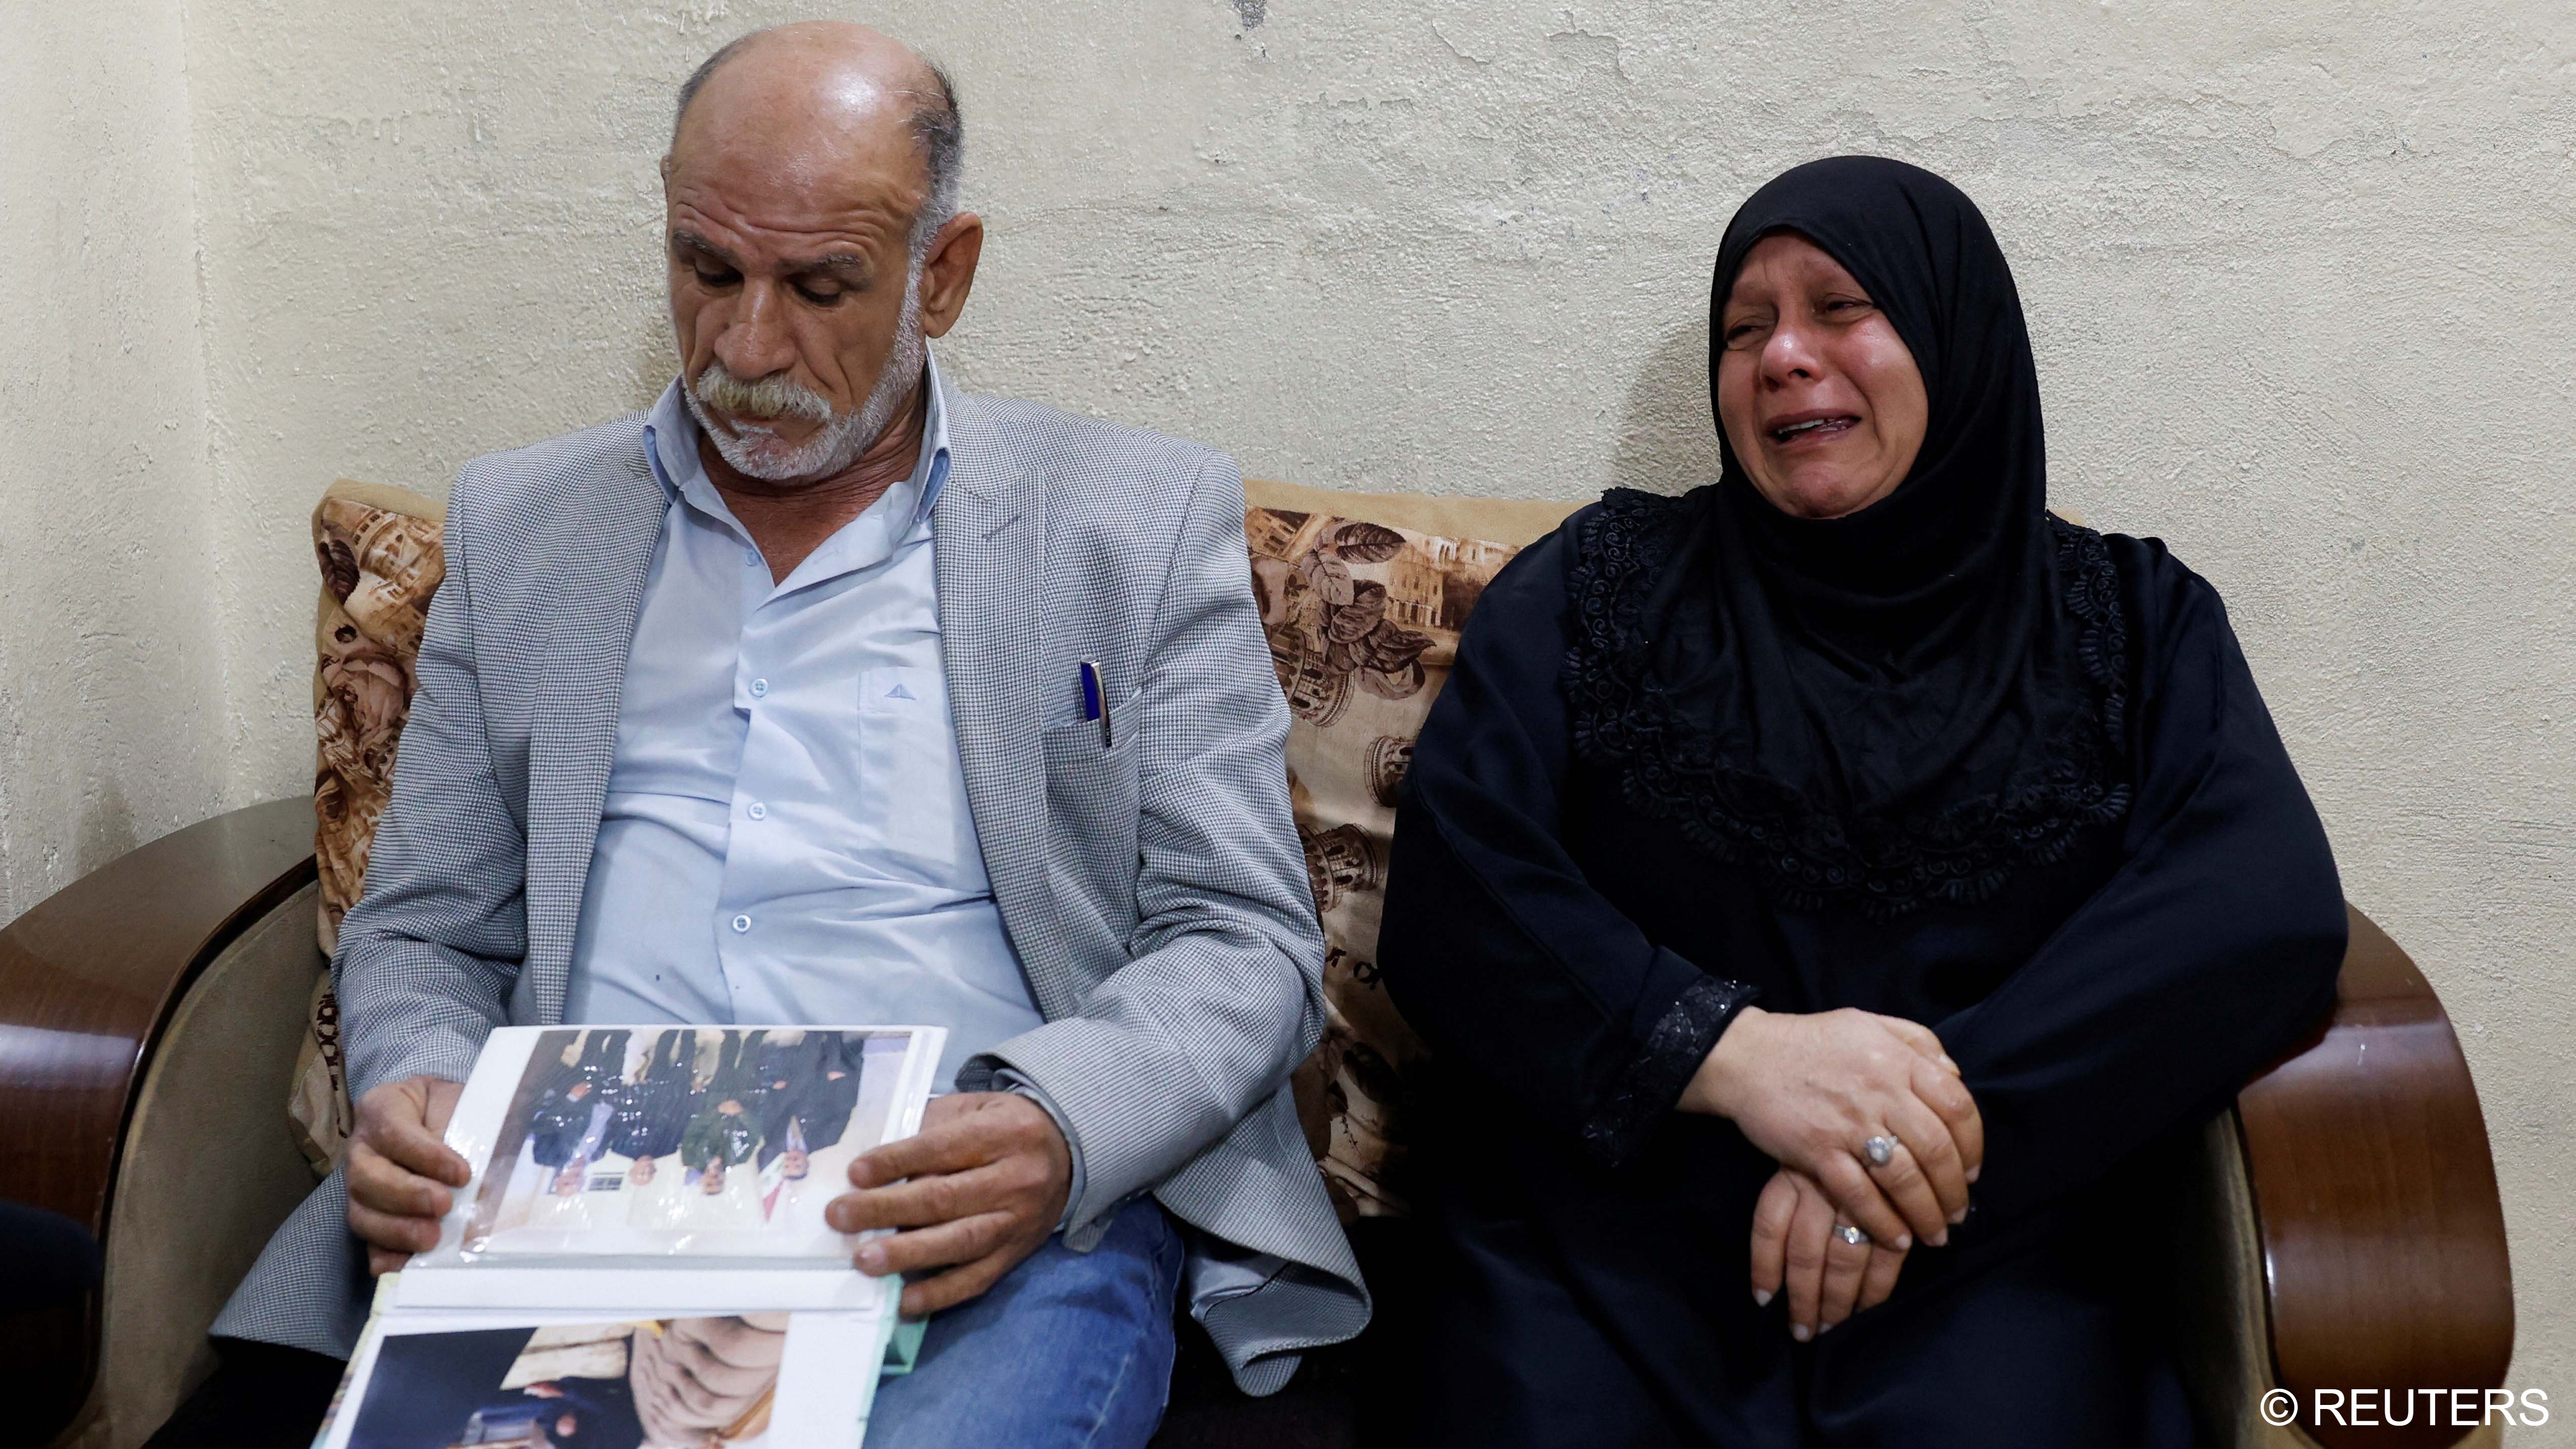 Majid Mohammed looks at pictures of his son who disappeared after the Camp Speicher massacre in 2014, where some of the hundreds of Iraqi military recruits who were abducted from Camp Speicher by Islamic State militants in June 2014 are believed to have been murdered, as his wife, Nadia Jasim, reacts during an interview with Reuters, in Baghdad, February 2023 (image: Reuters)